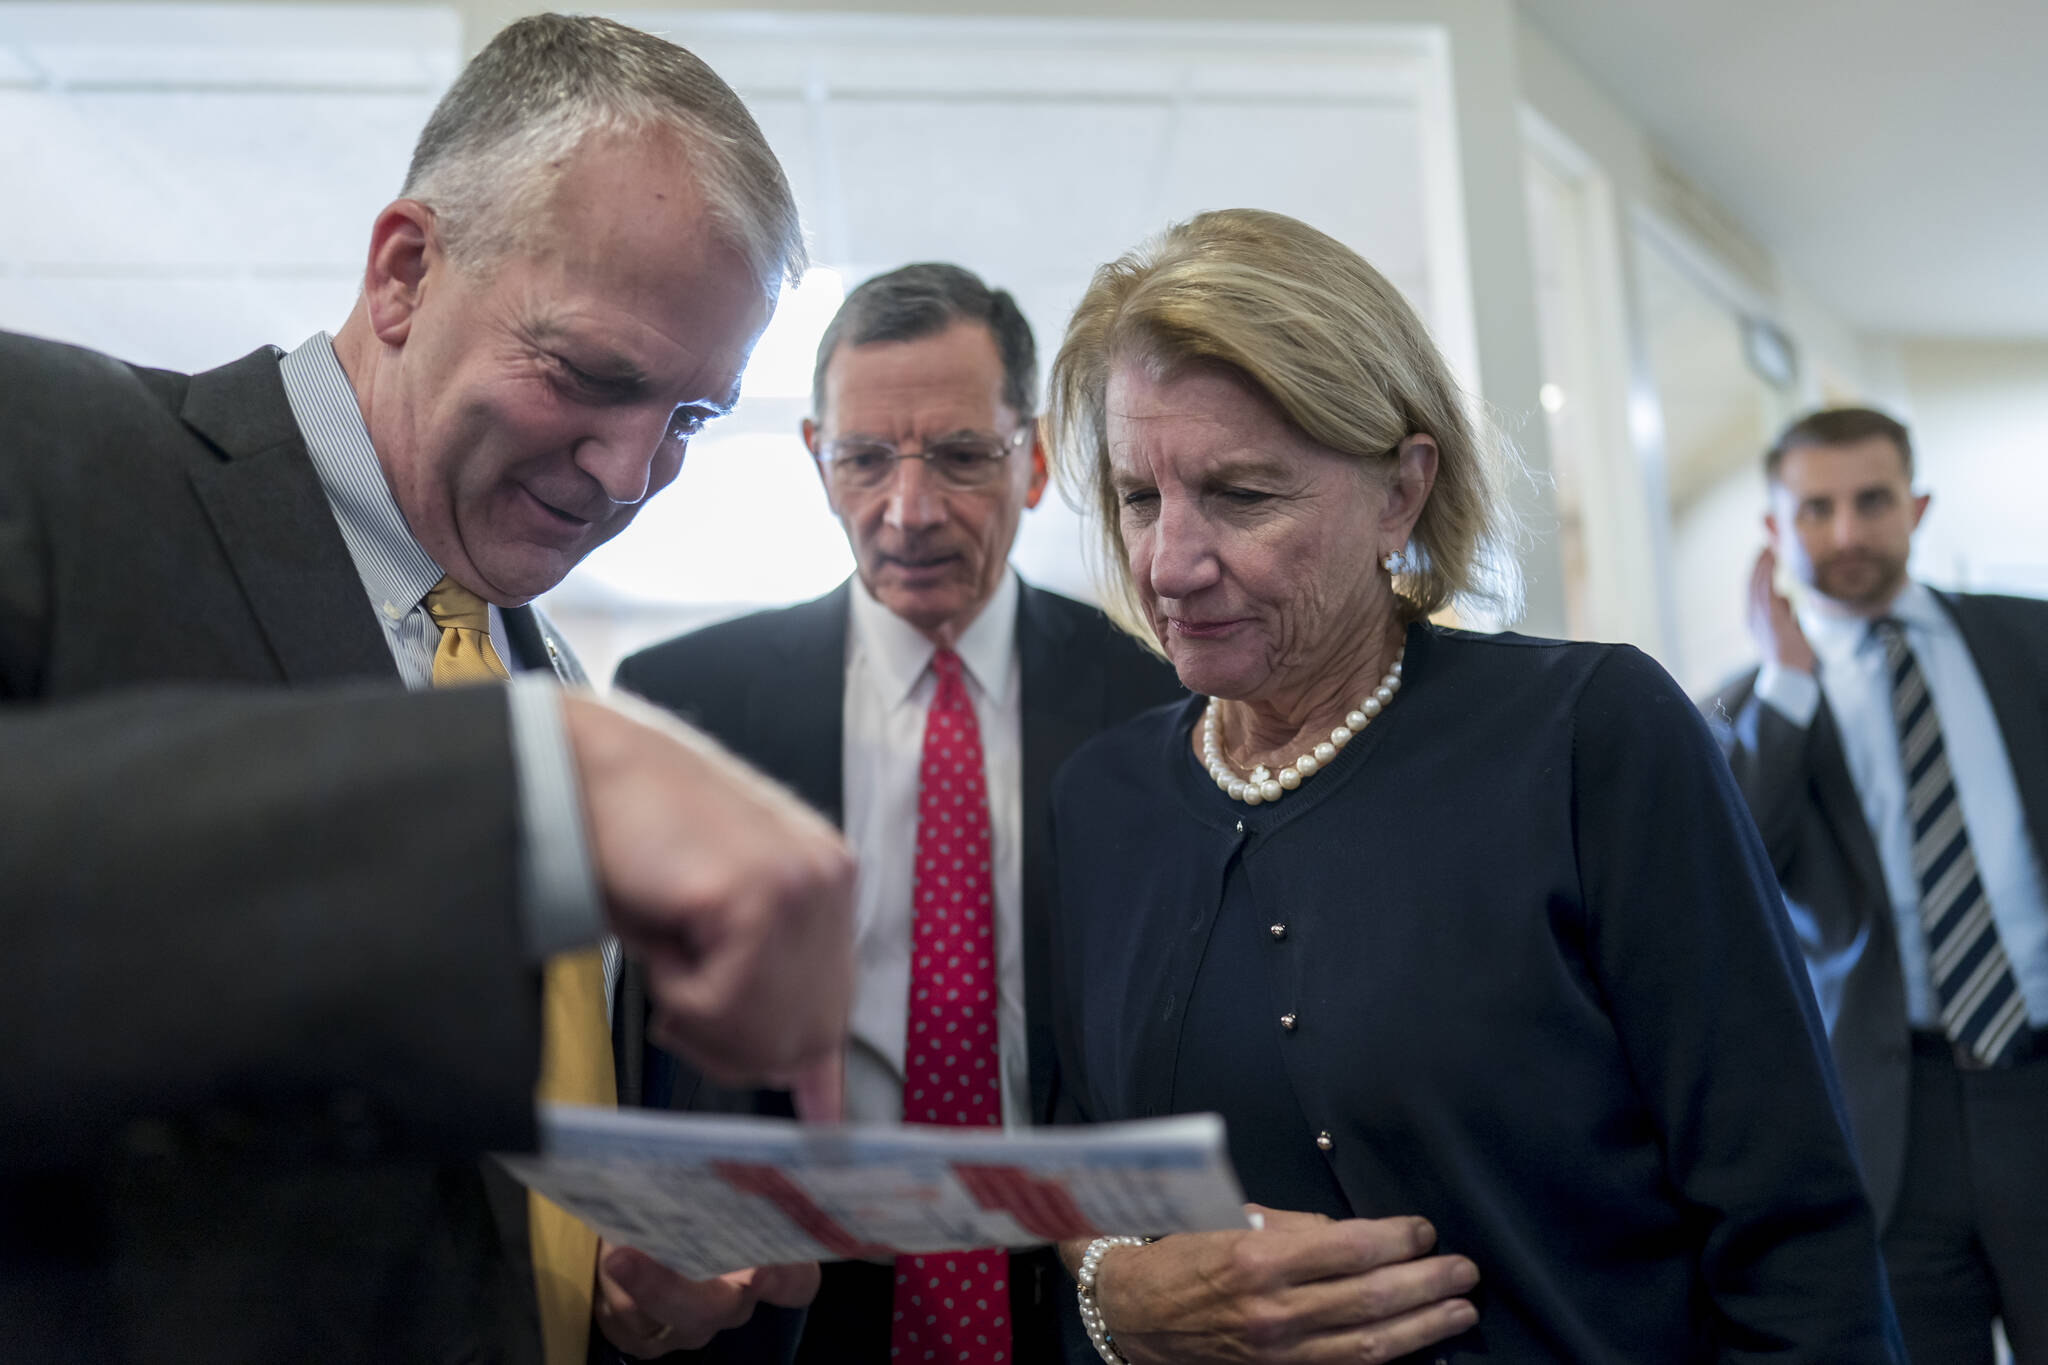 From left, Sen. Dan Sullivan, R-Alaska, Sen. John Barrasso, R-Wyo., and Sen. Shelley Moore Capito, R-W.Va., confer just before a news conference to discuss their efforts to rescind recent Biden administration rules on the National Environmental Policy Act, at the Capitol in Washington, Tuesday, Aug. 2, 2022. (AP Photo / J. Scott Applewhite)